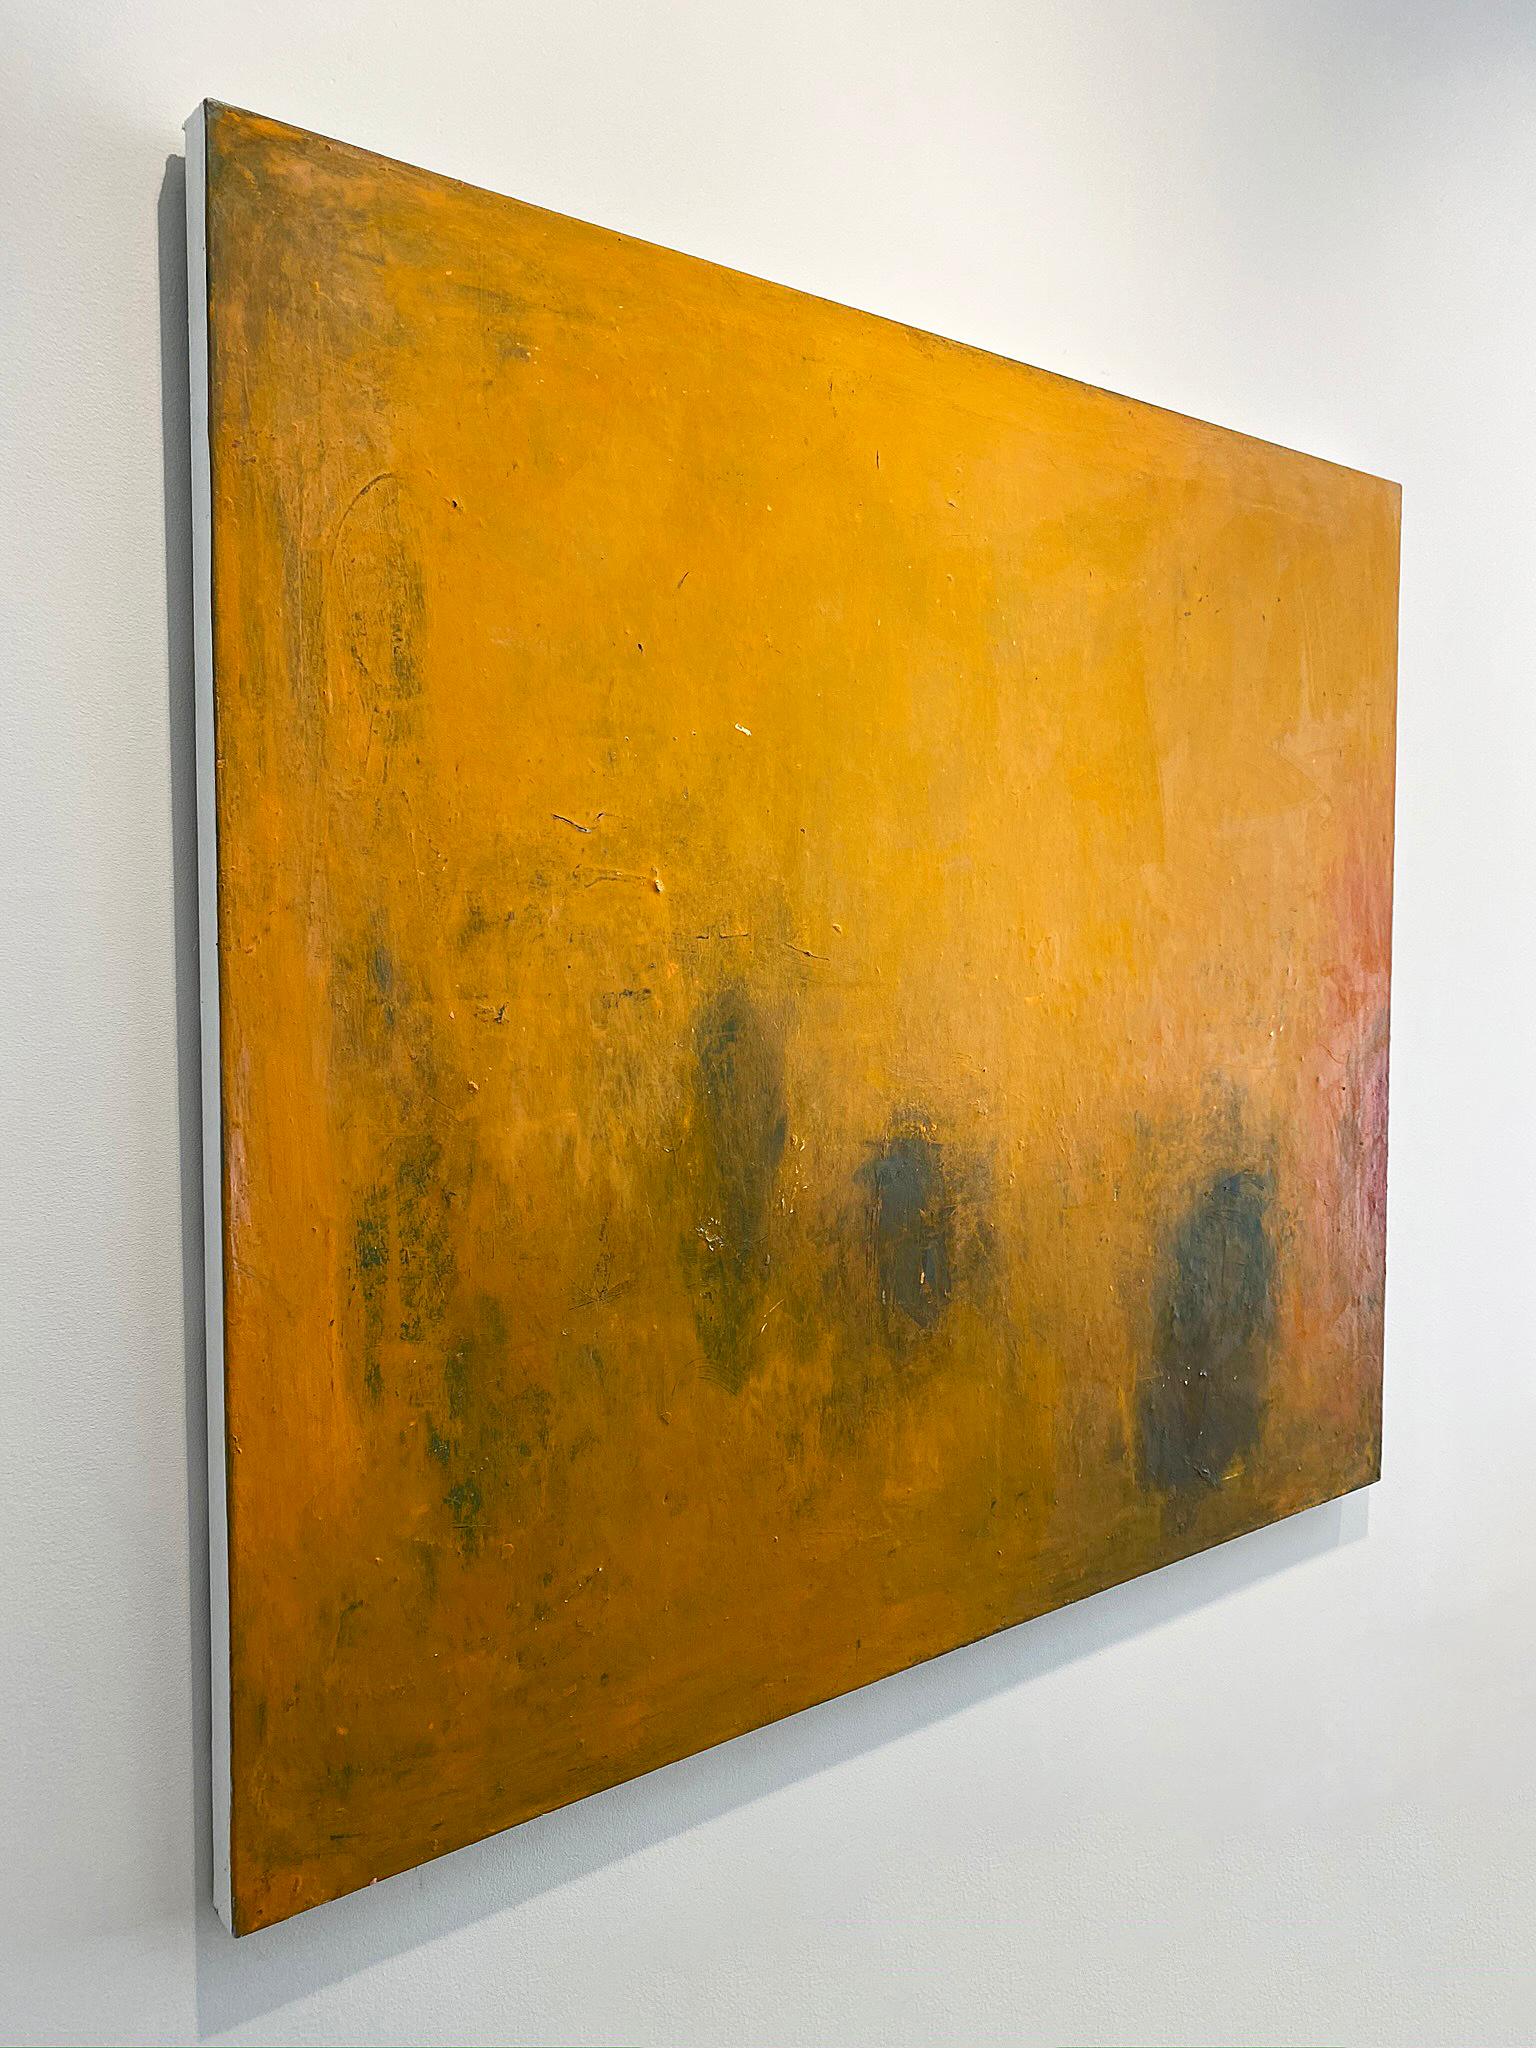 'Warmth' in 2019 by New York City base, French artist Sandrine Kern. Oil and cold wax on canvas, 40 x 46 in. This abstracted landscape painting features a landscape scene in colors of orange, red, green, and brown.

Sandrine Kern's work is